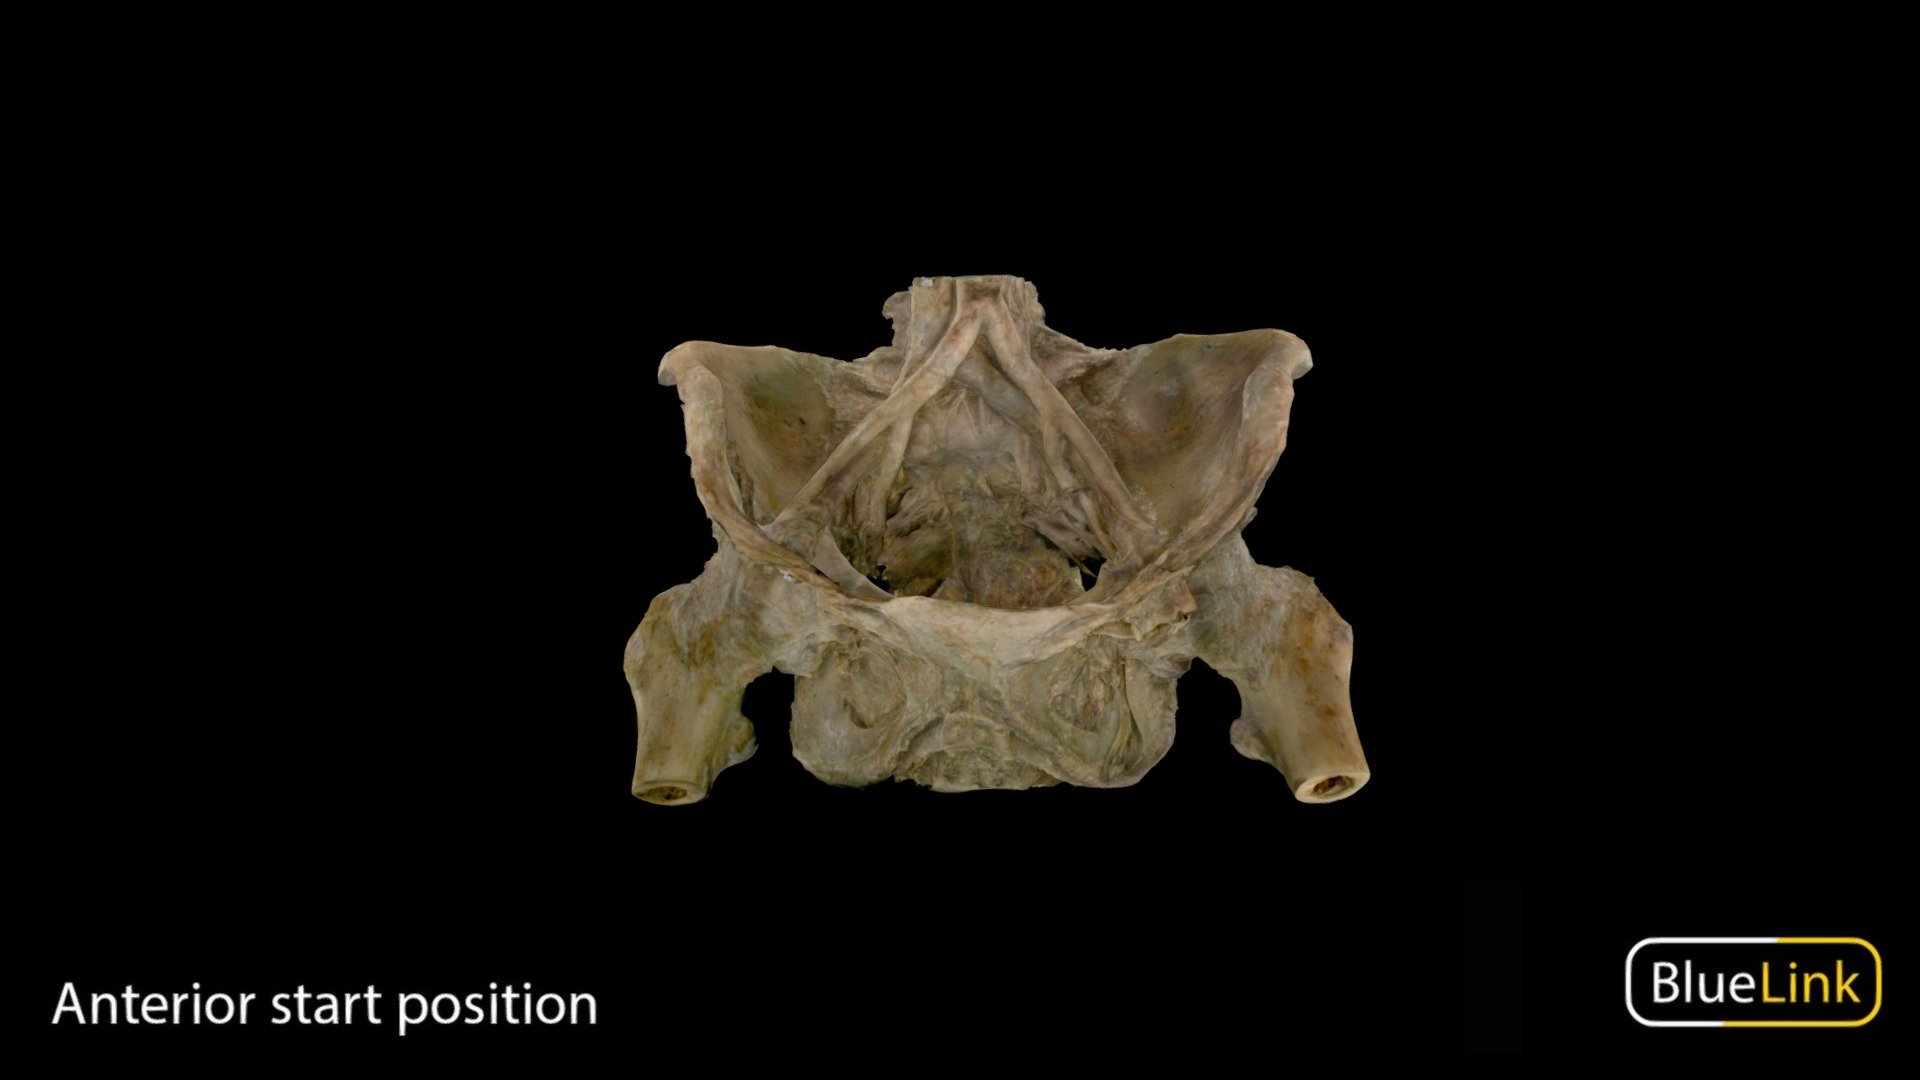 3D scan of pelvis with muscles removed; coronal section of penis

Captured with Einscan Pro

Captured and edited by: Will Gribbin

Copyright2019 BK Alsup &amp; GM Fox

ID 29207-P01 - Skeletonized Pelvis - 3D model by Bluelink Anatomy - University of Michigan (@bluelinkanatomy) 3d model